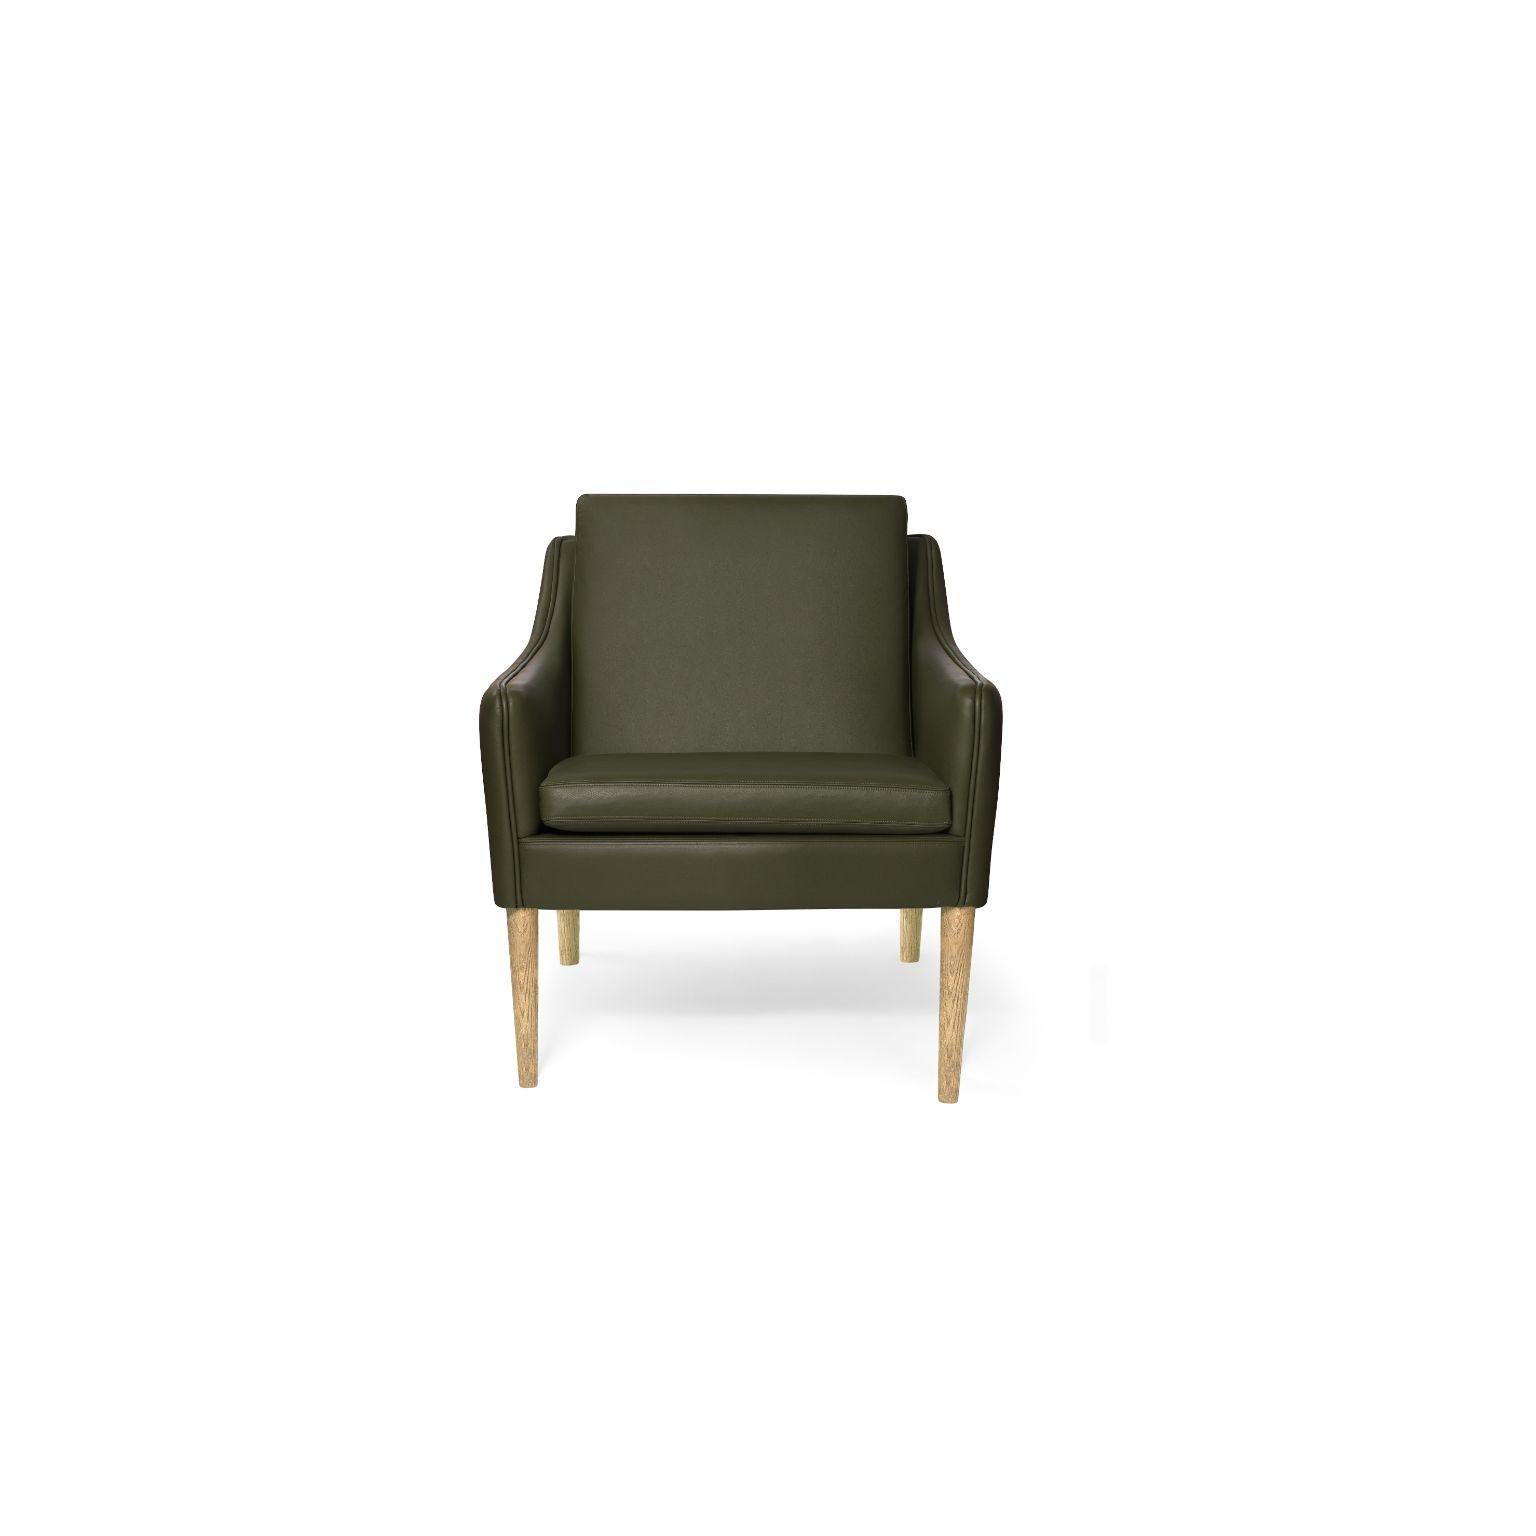 Mr. Olsen Lounge chair Solid Smoked Oak Pickle Green Leather by Warm Nordic
Dimensions: D81 x W79 x H 78 cm
Material: Textile upholstery, Foam, Spring system, Oak, Leather
Weight: 27 kg
Also available in different colors, materials and finishes.